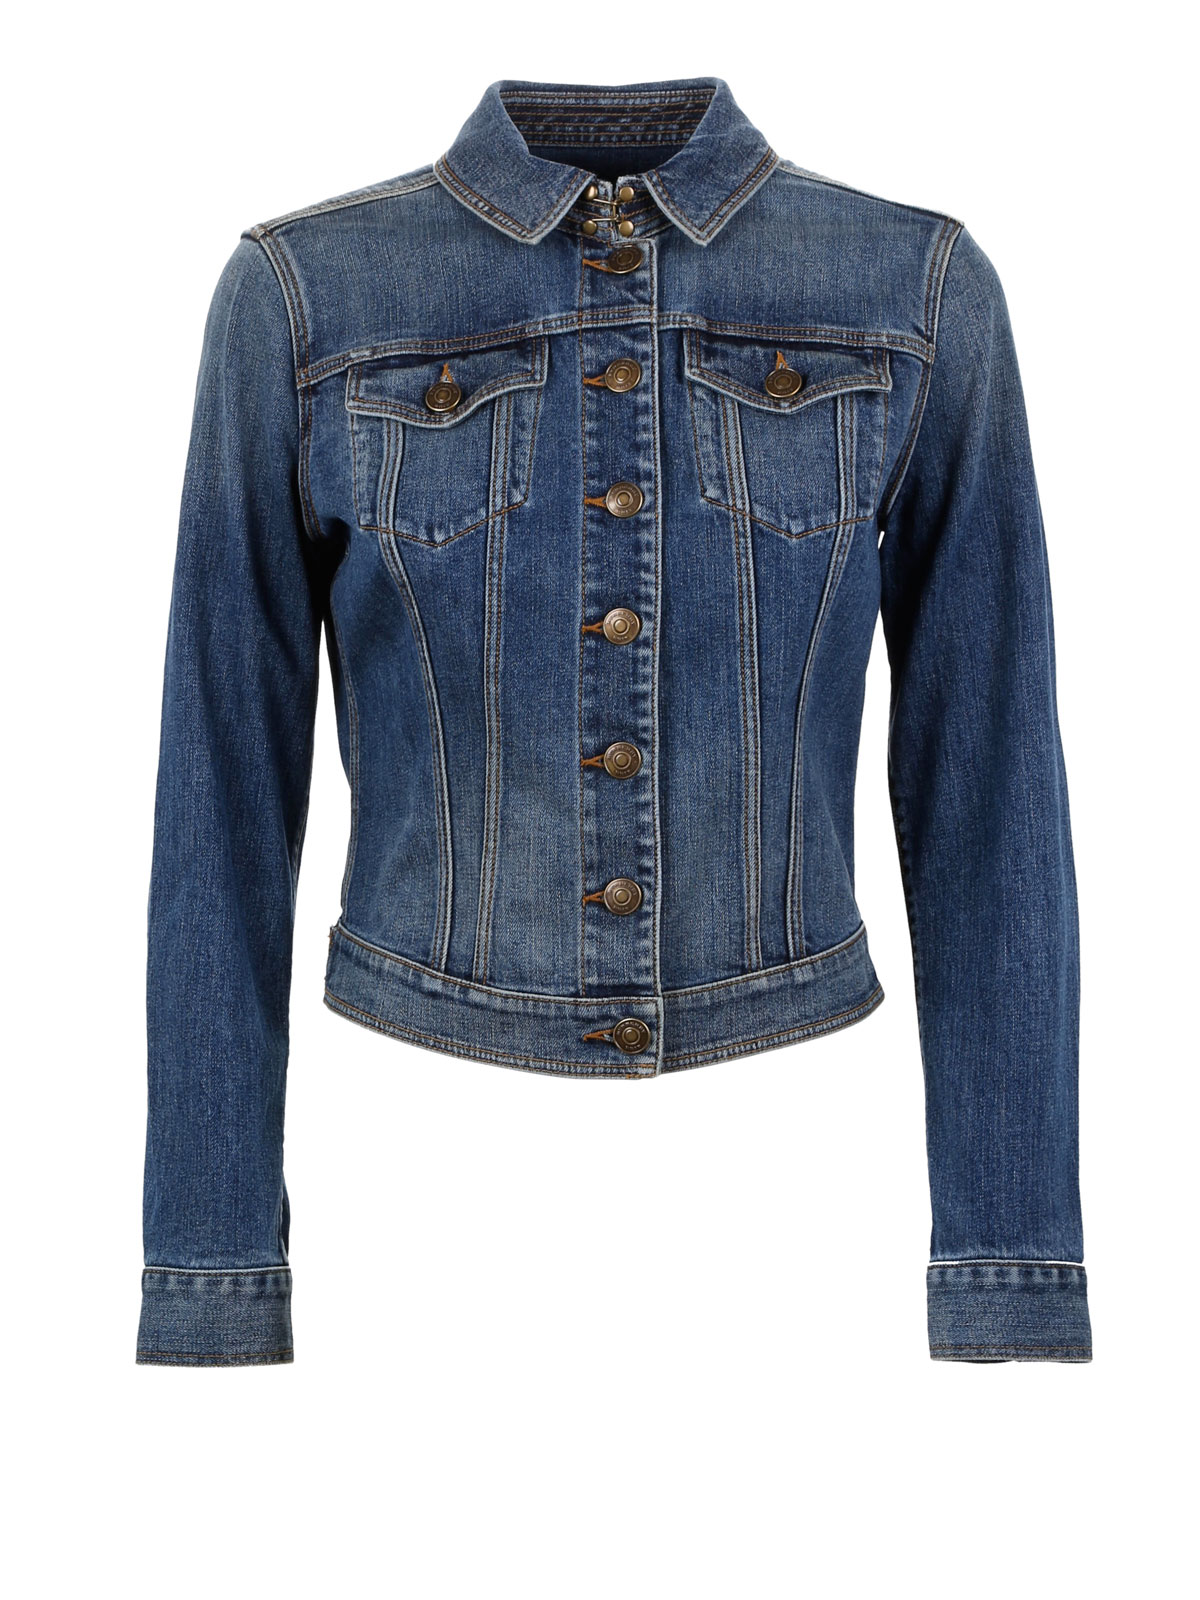 Burberry Womens Jean Jacket | vlr.eng.br